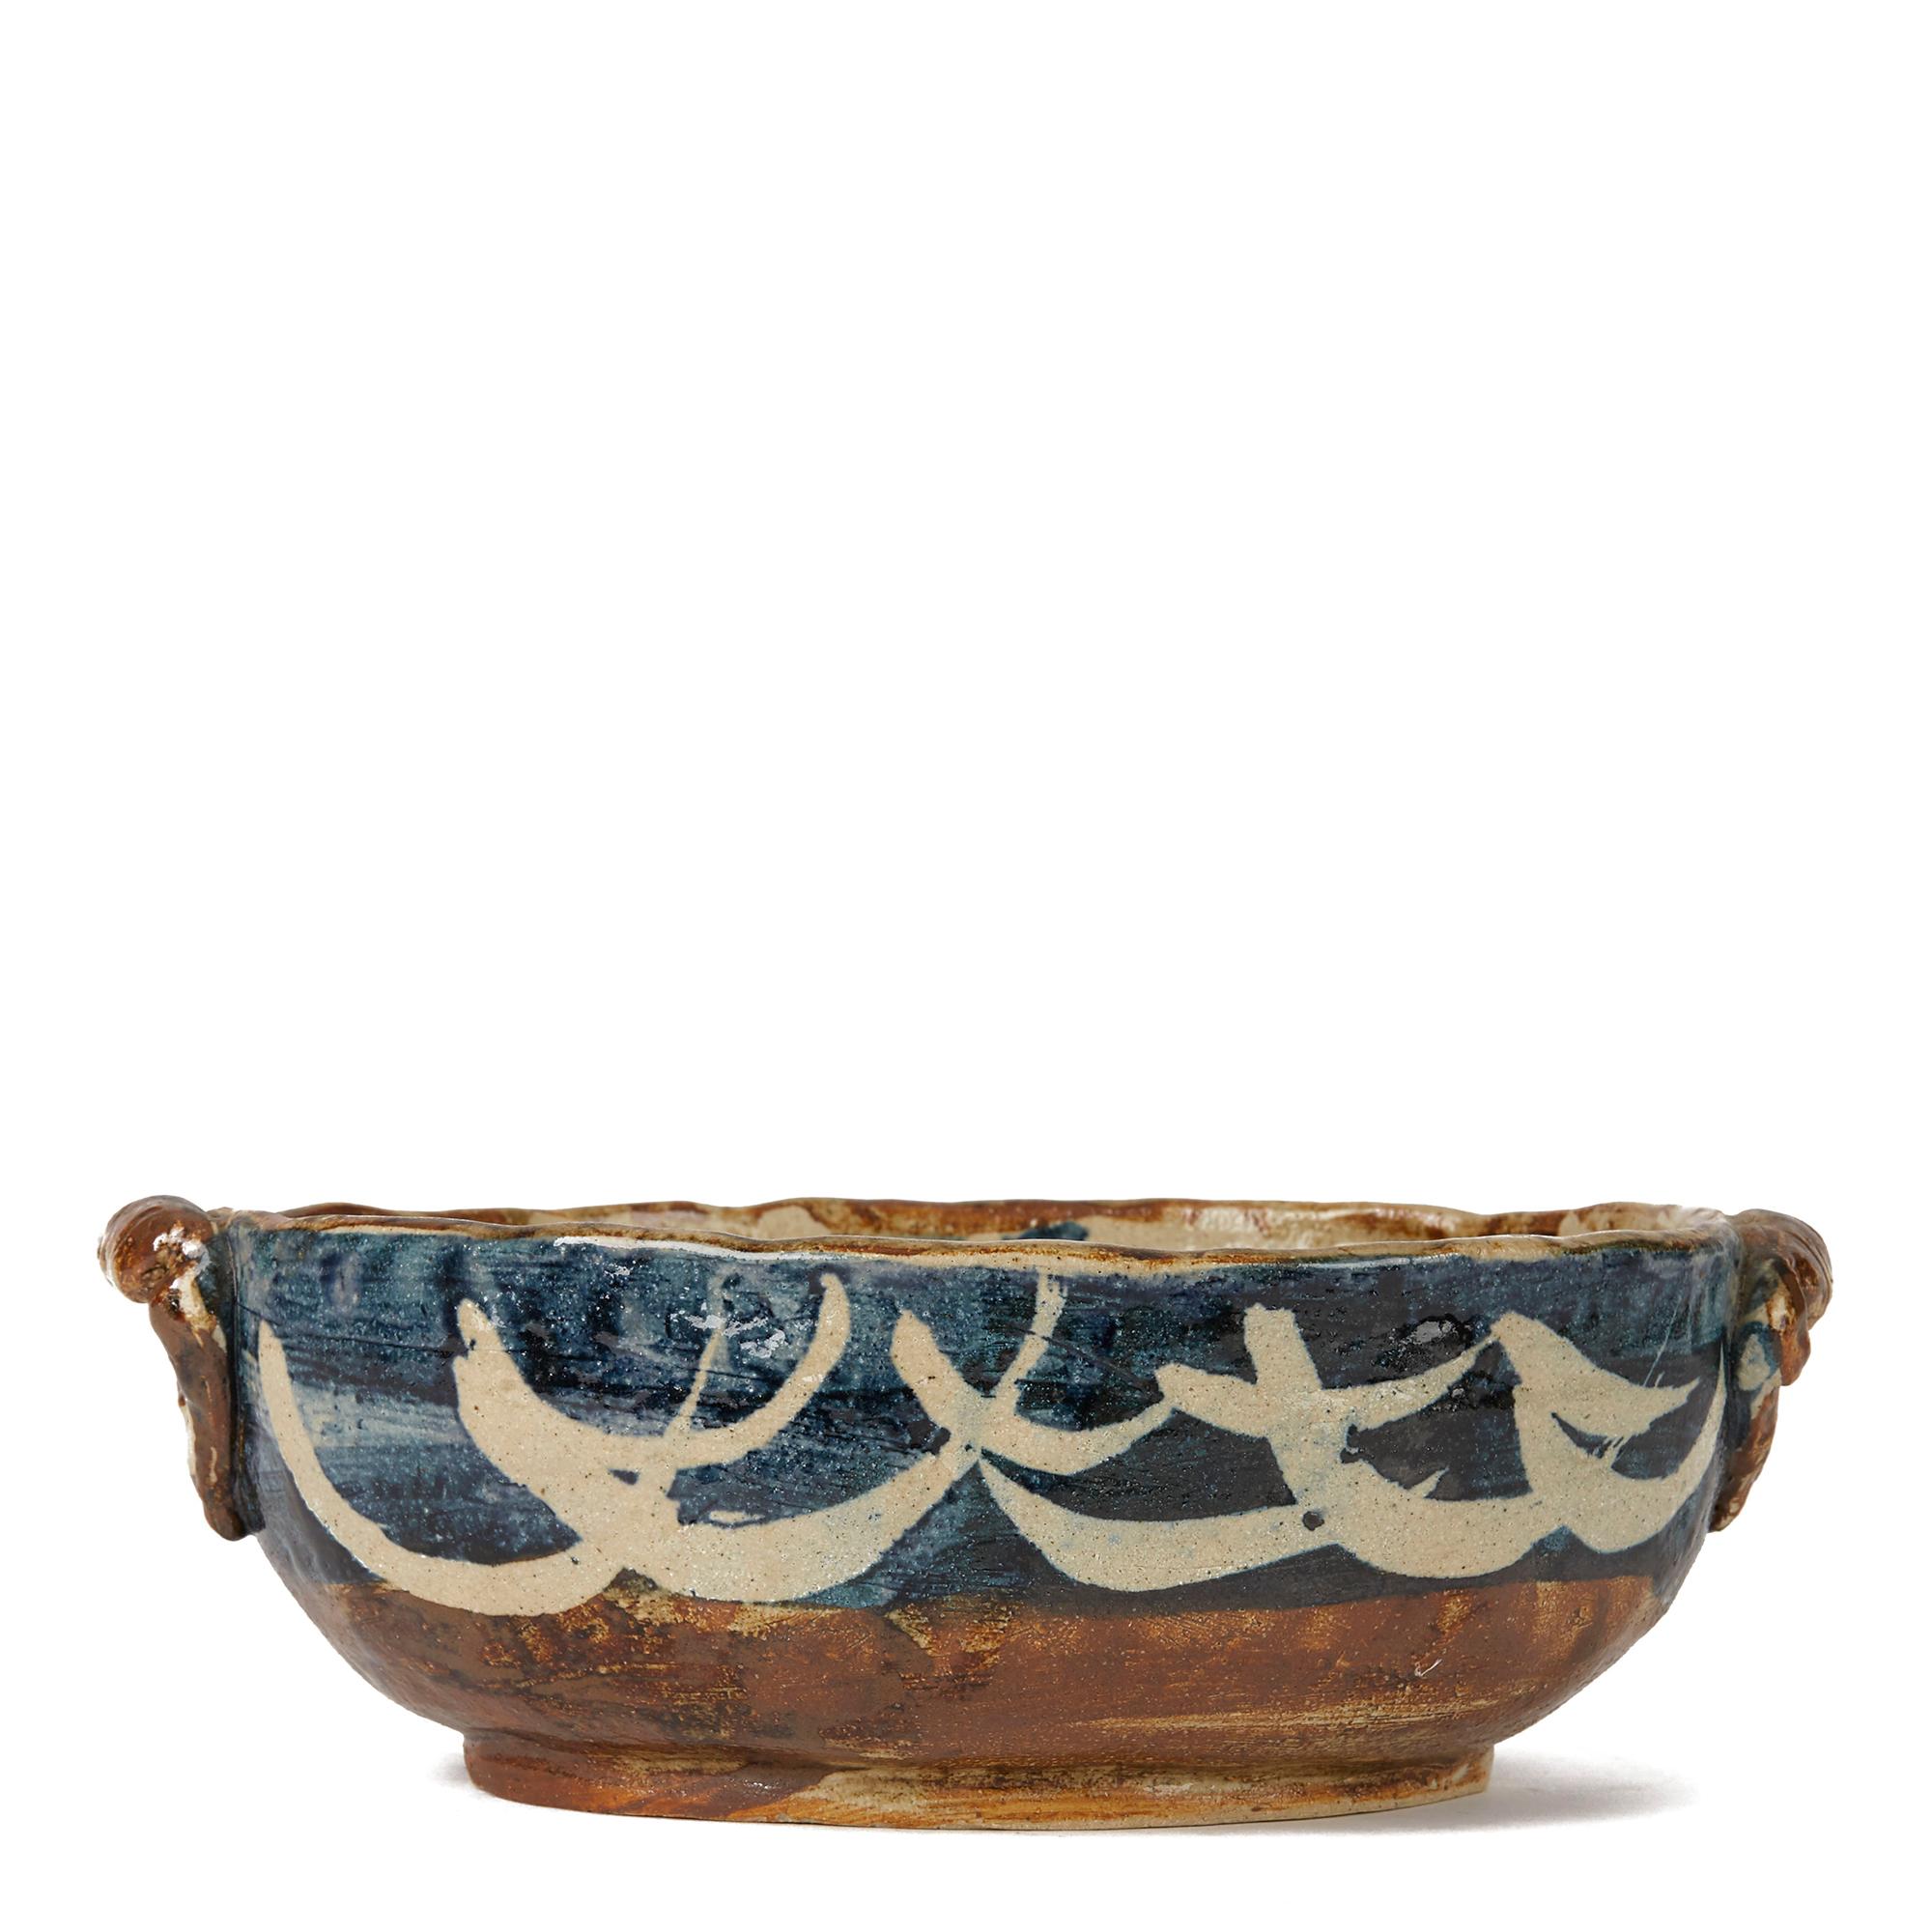 A rare studio art pottery bowl of oval shape applied with lug handles to either end by Lydia Corbett (Sylvette David). The heavily potted bowl is hand painted in tones of brown and blue on a natural glazed ground and is not marked.

Sylvette David